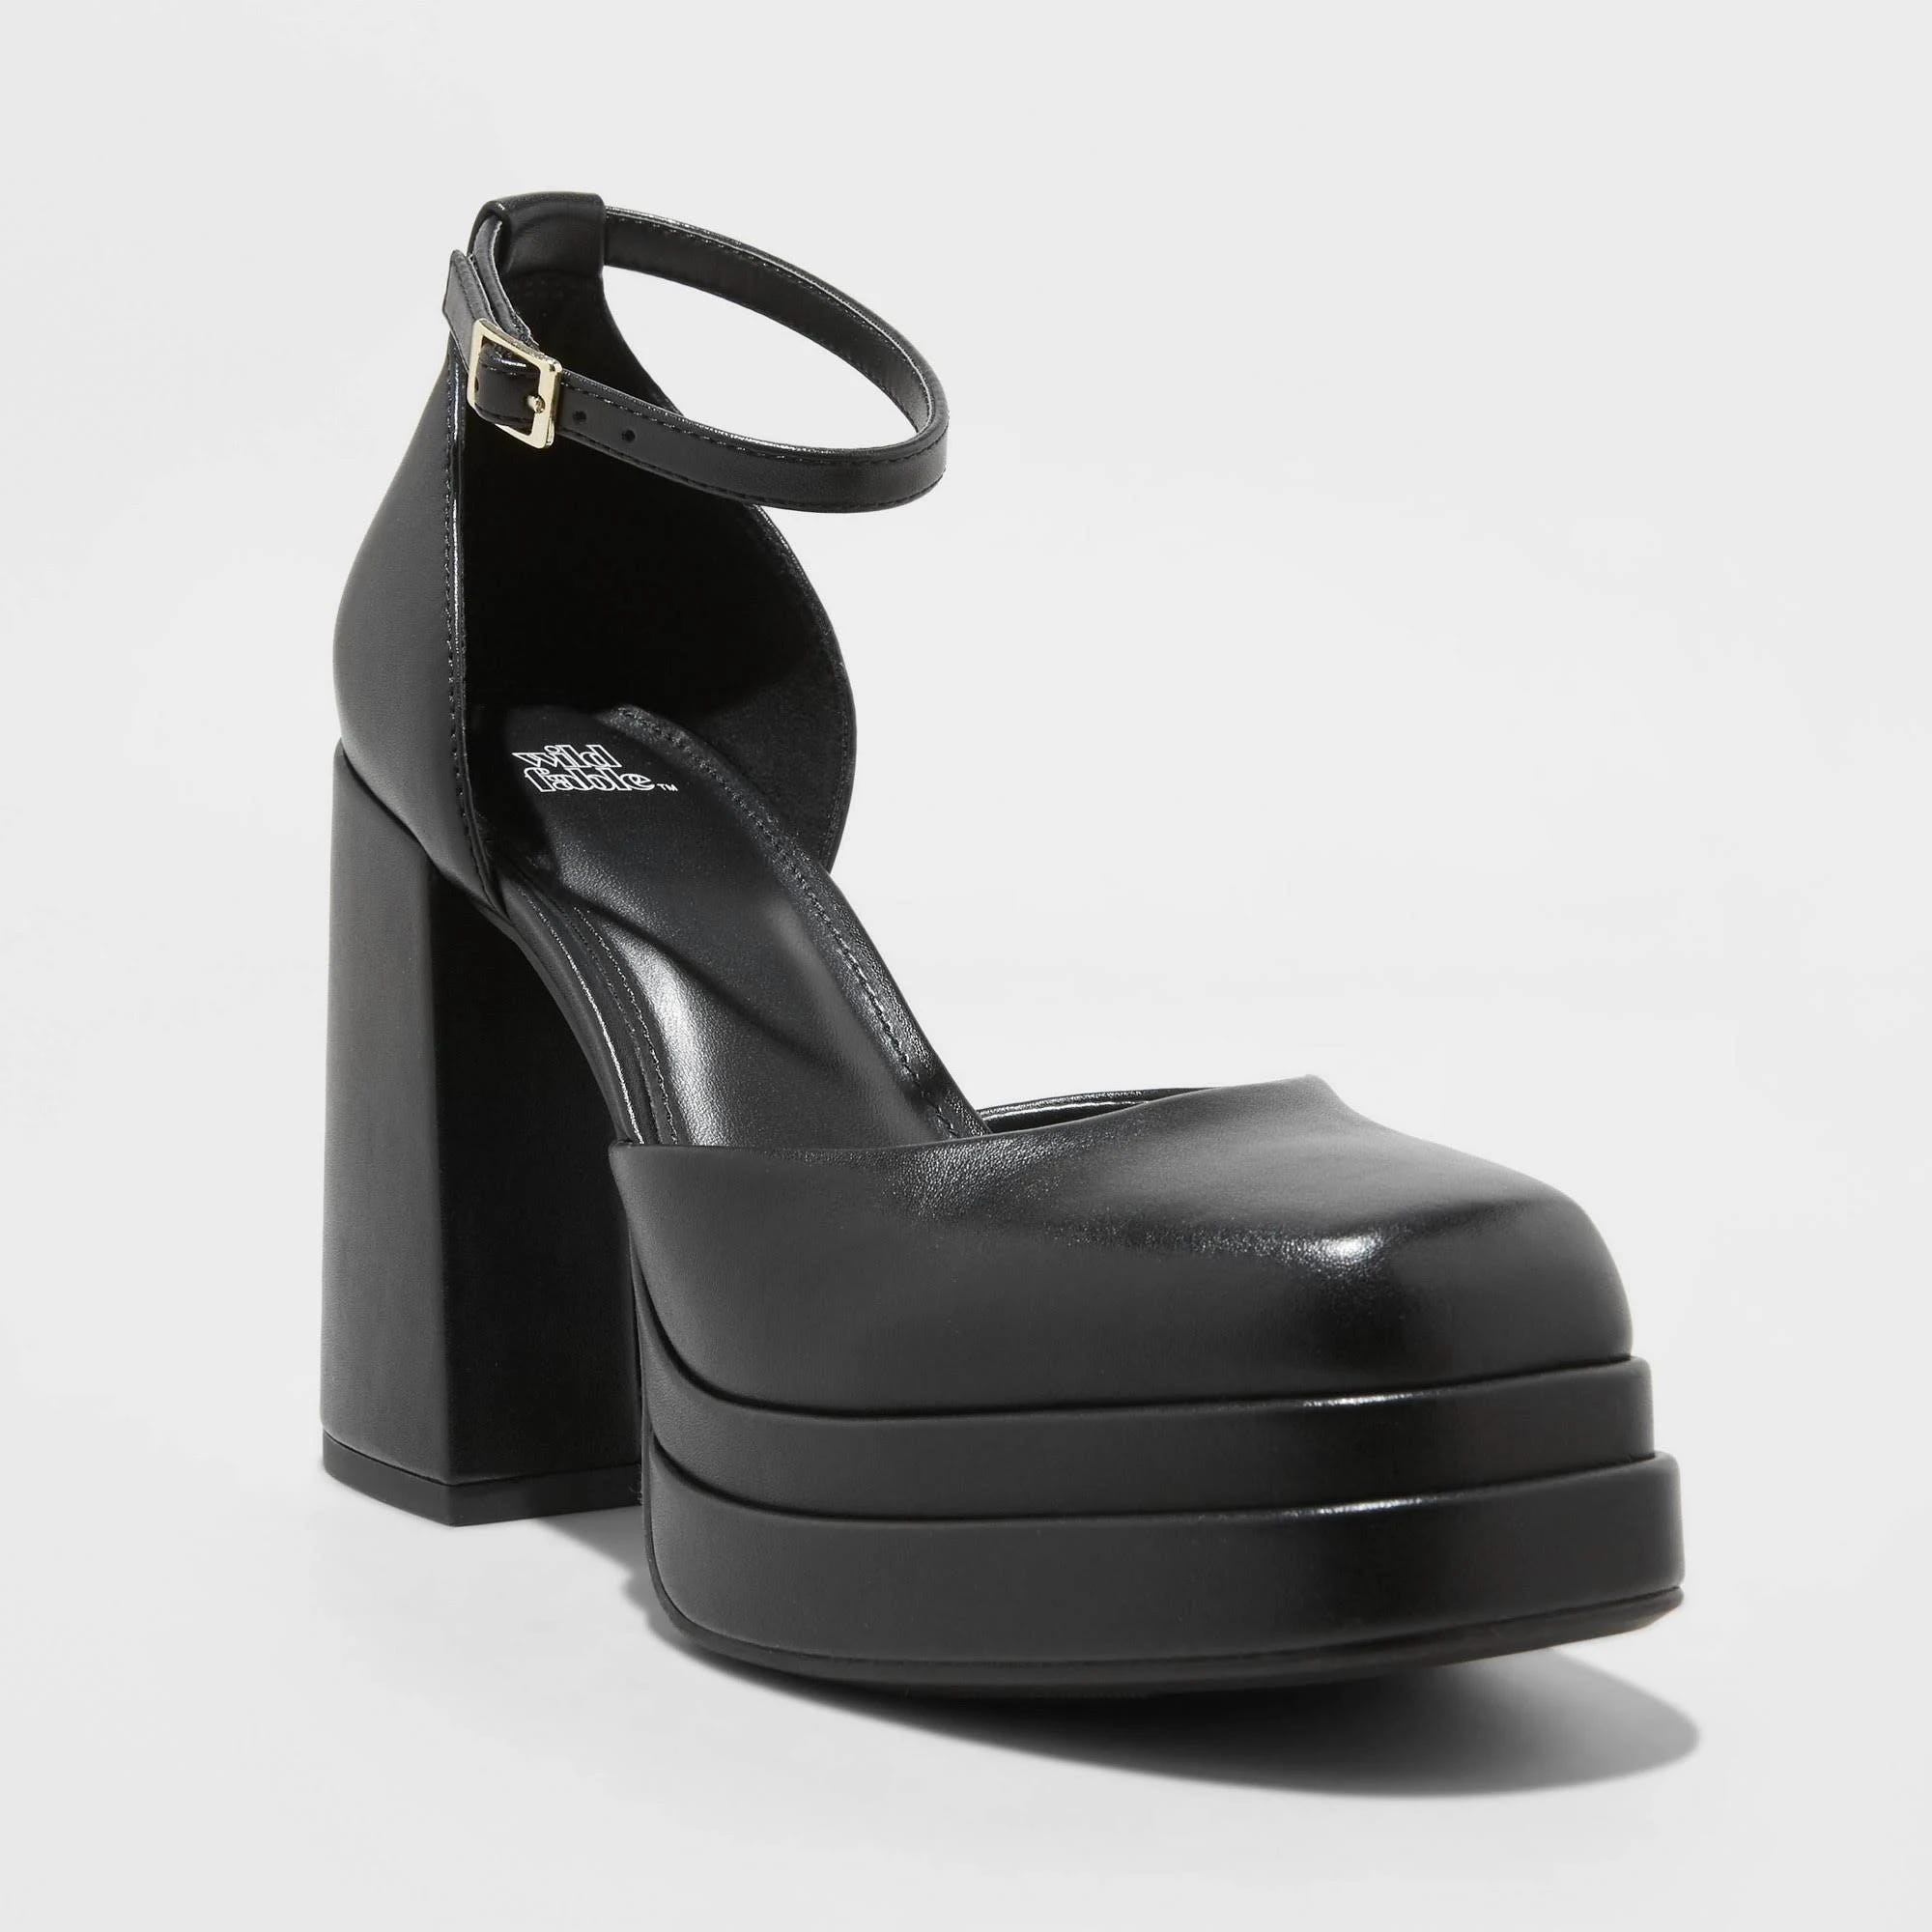 Comfortable Bianca Platform Pumps by Wild Fable in Black | Image